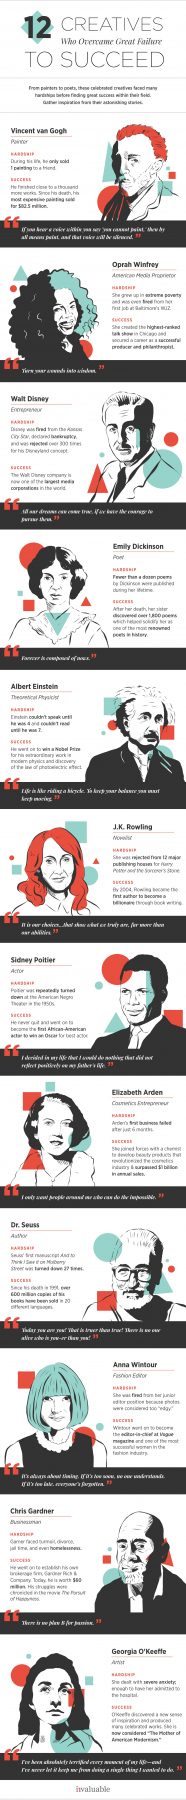 Overcoming Failure Infographic featuring successful famous people